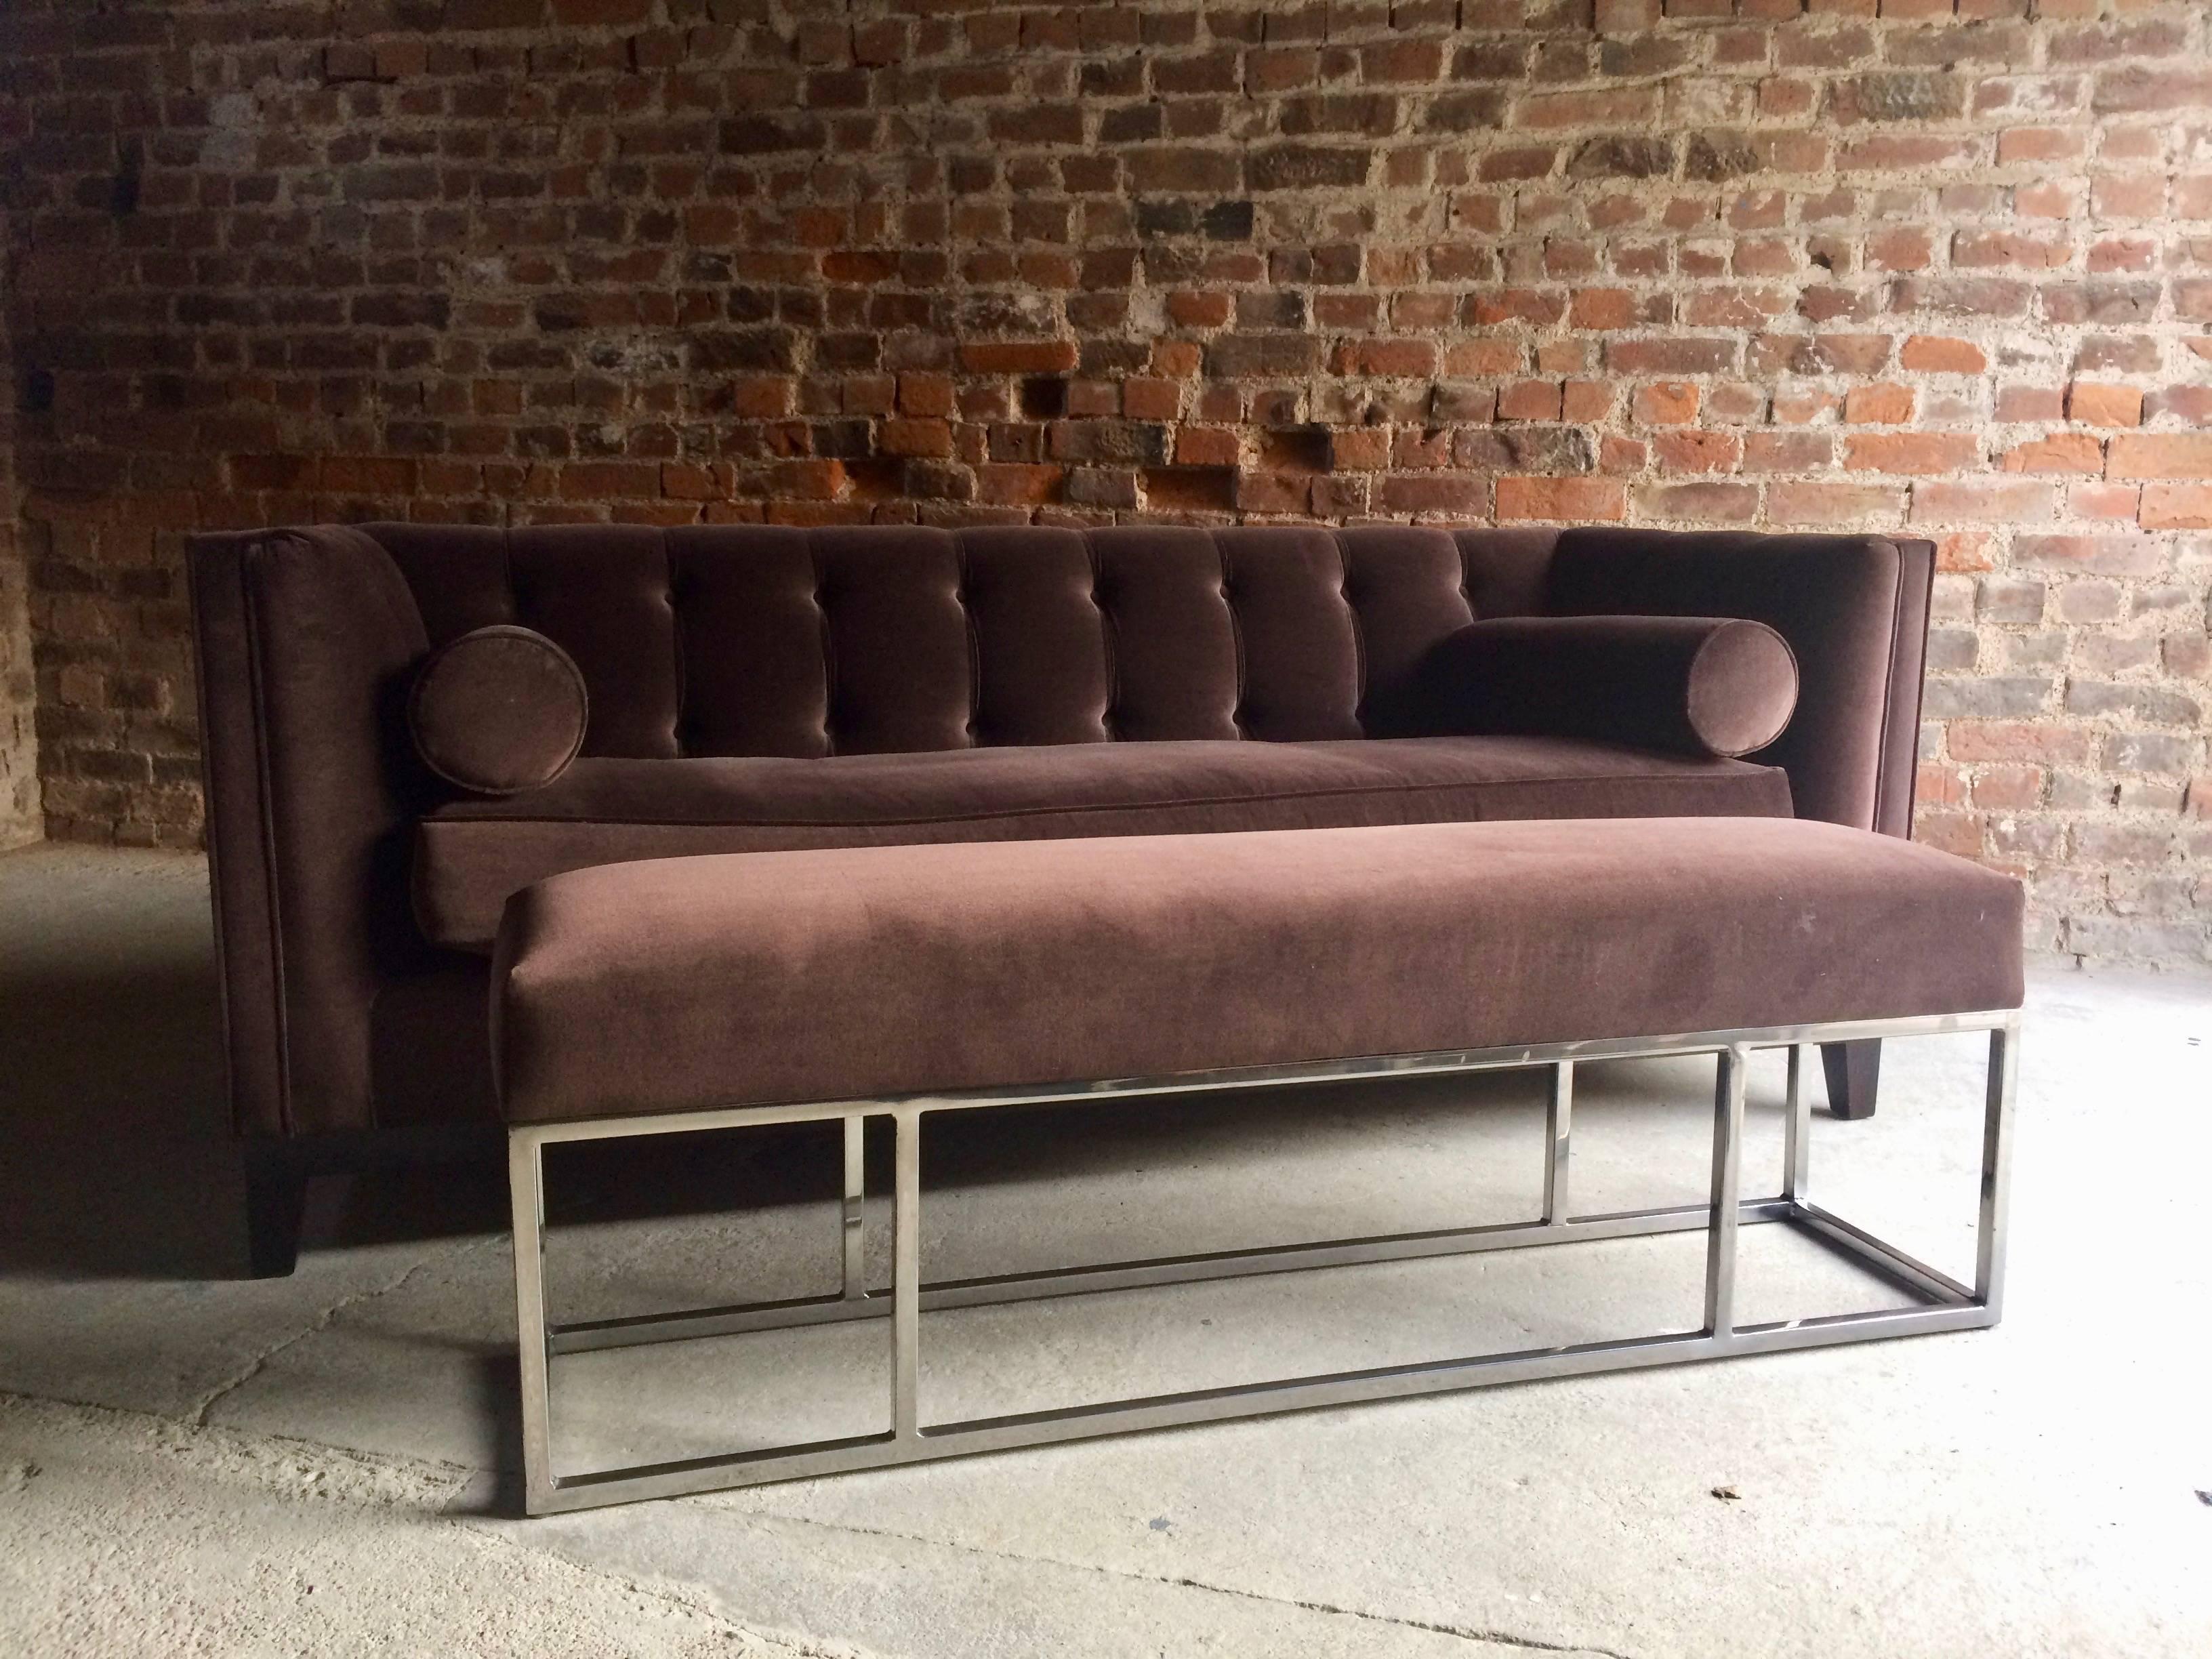 A wonderful opportunity to acquire possibly the nicest sofa we have ever had the good fortune to own, beautifully presented and offered in excellent condition, this large and elegant Chesterfield style sofa was recently commissioned by a private